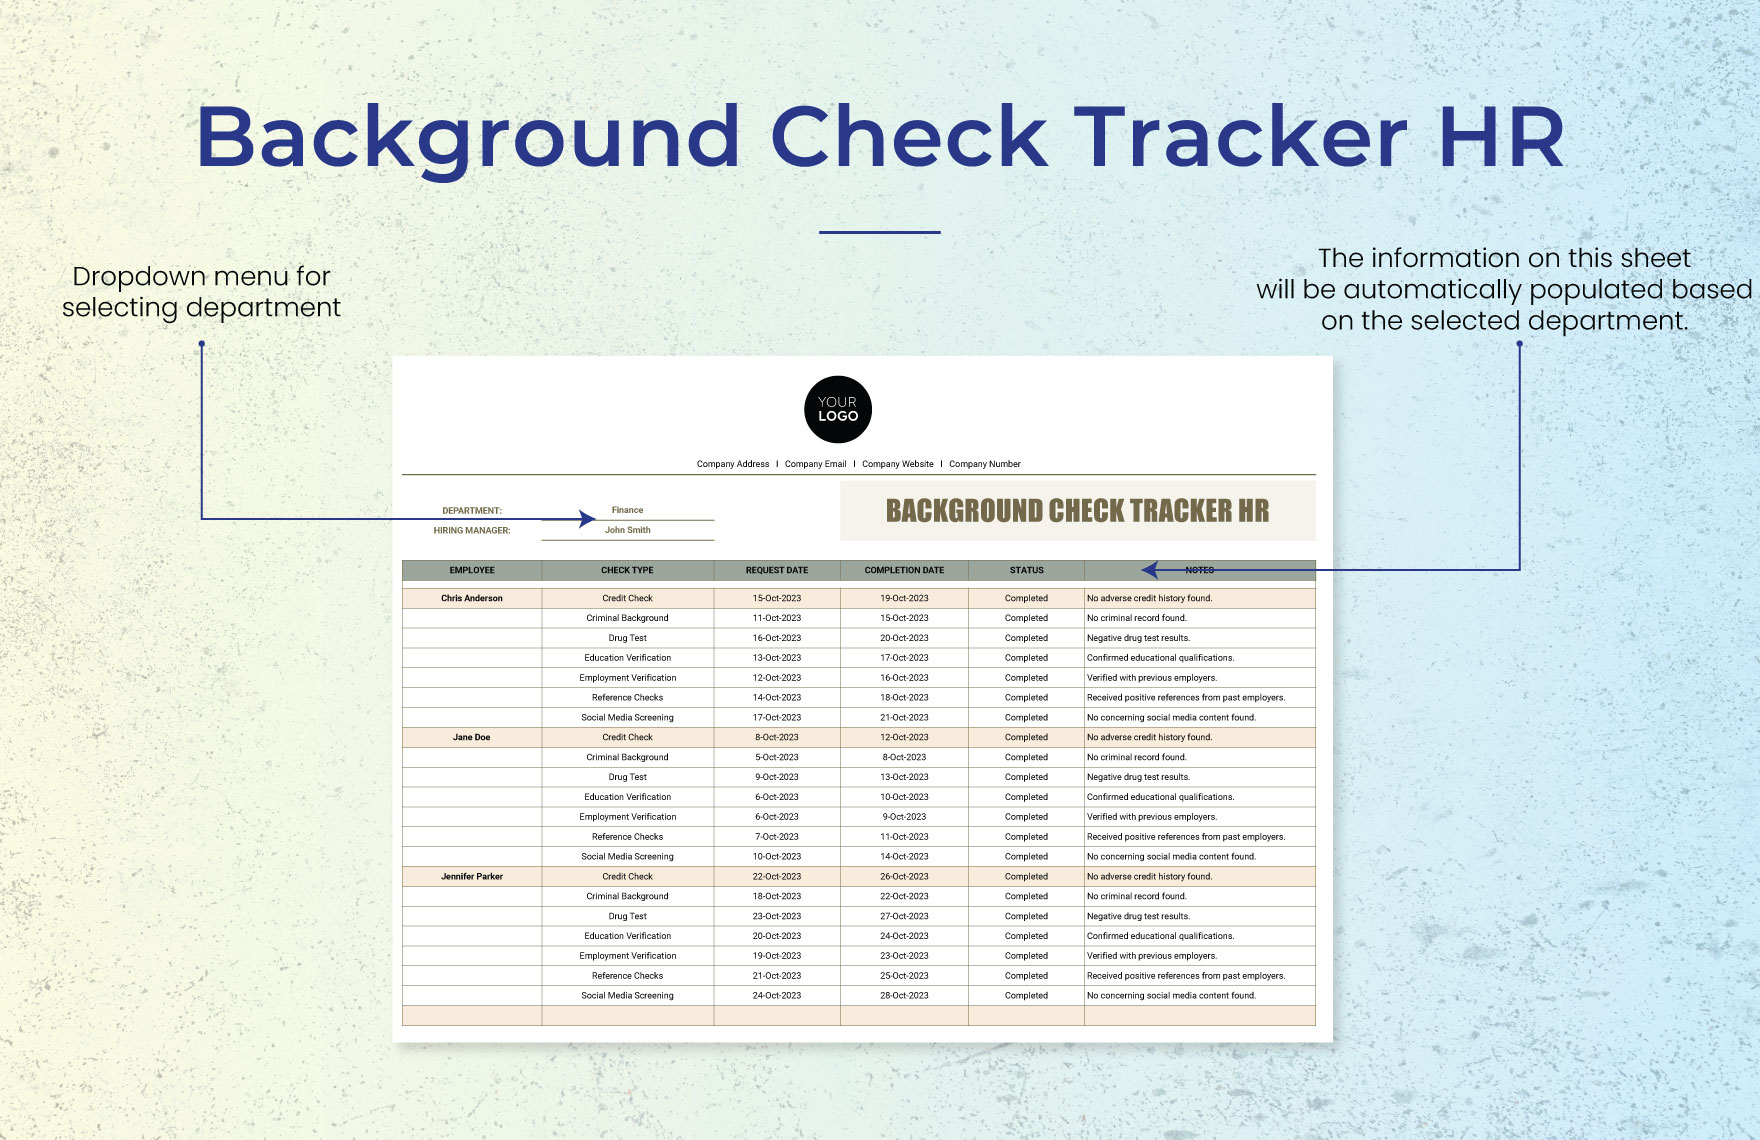 Background Check Tracker HR Template